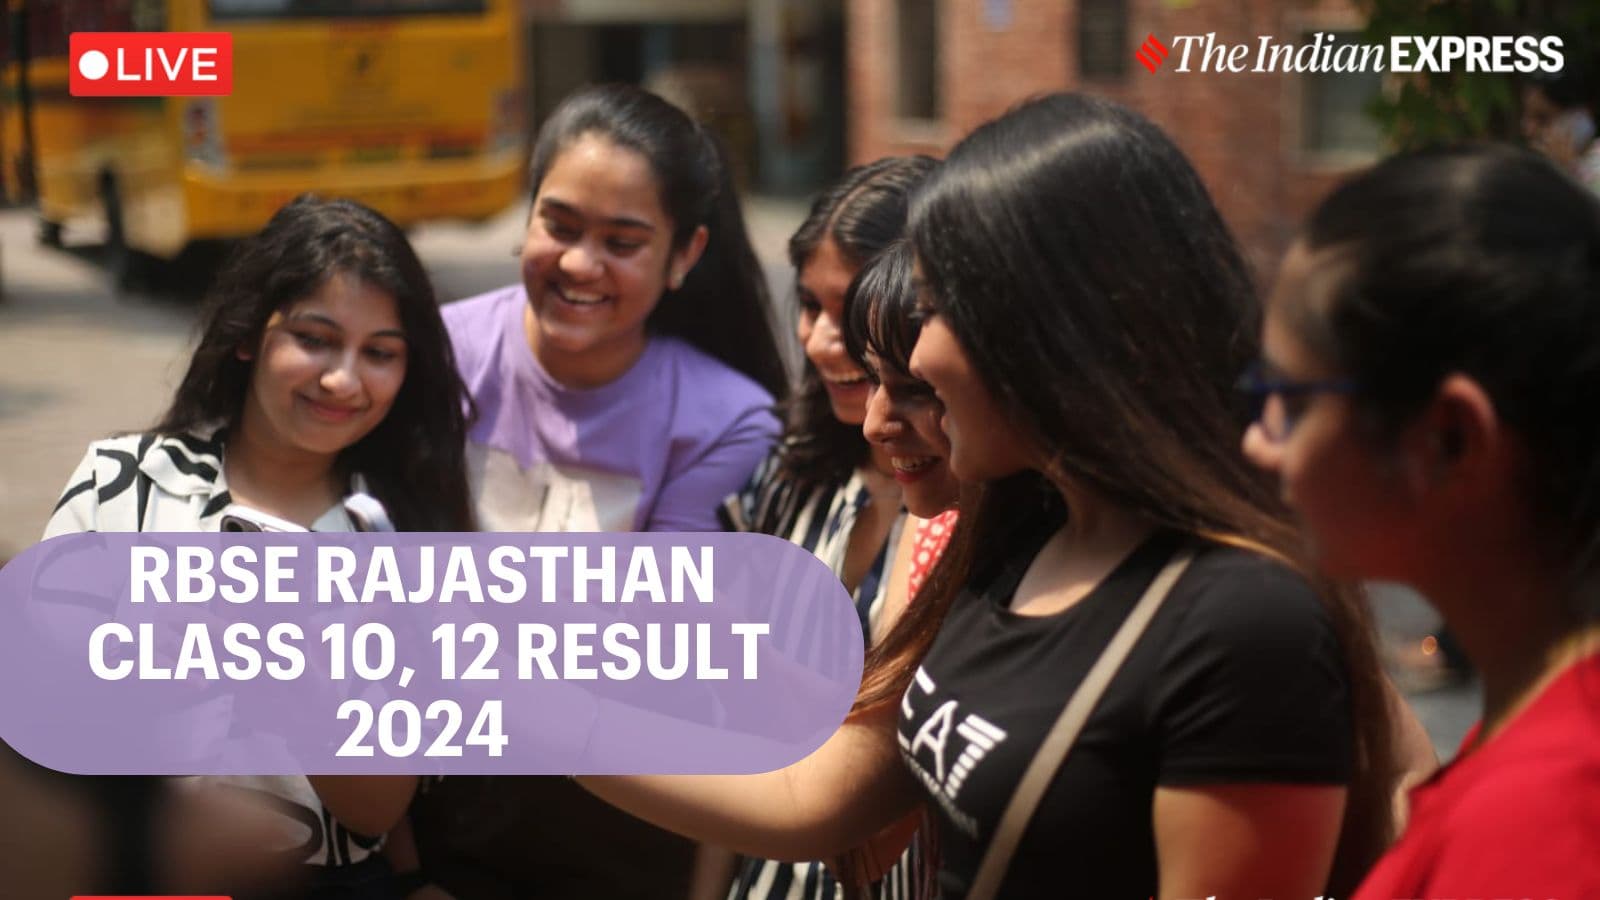 RBSE 10th, 12th Result 2024 Live Updates: Result declared before May 20